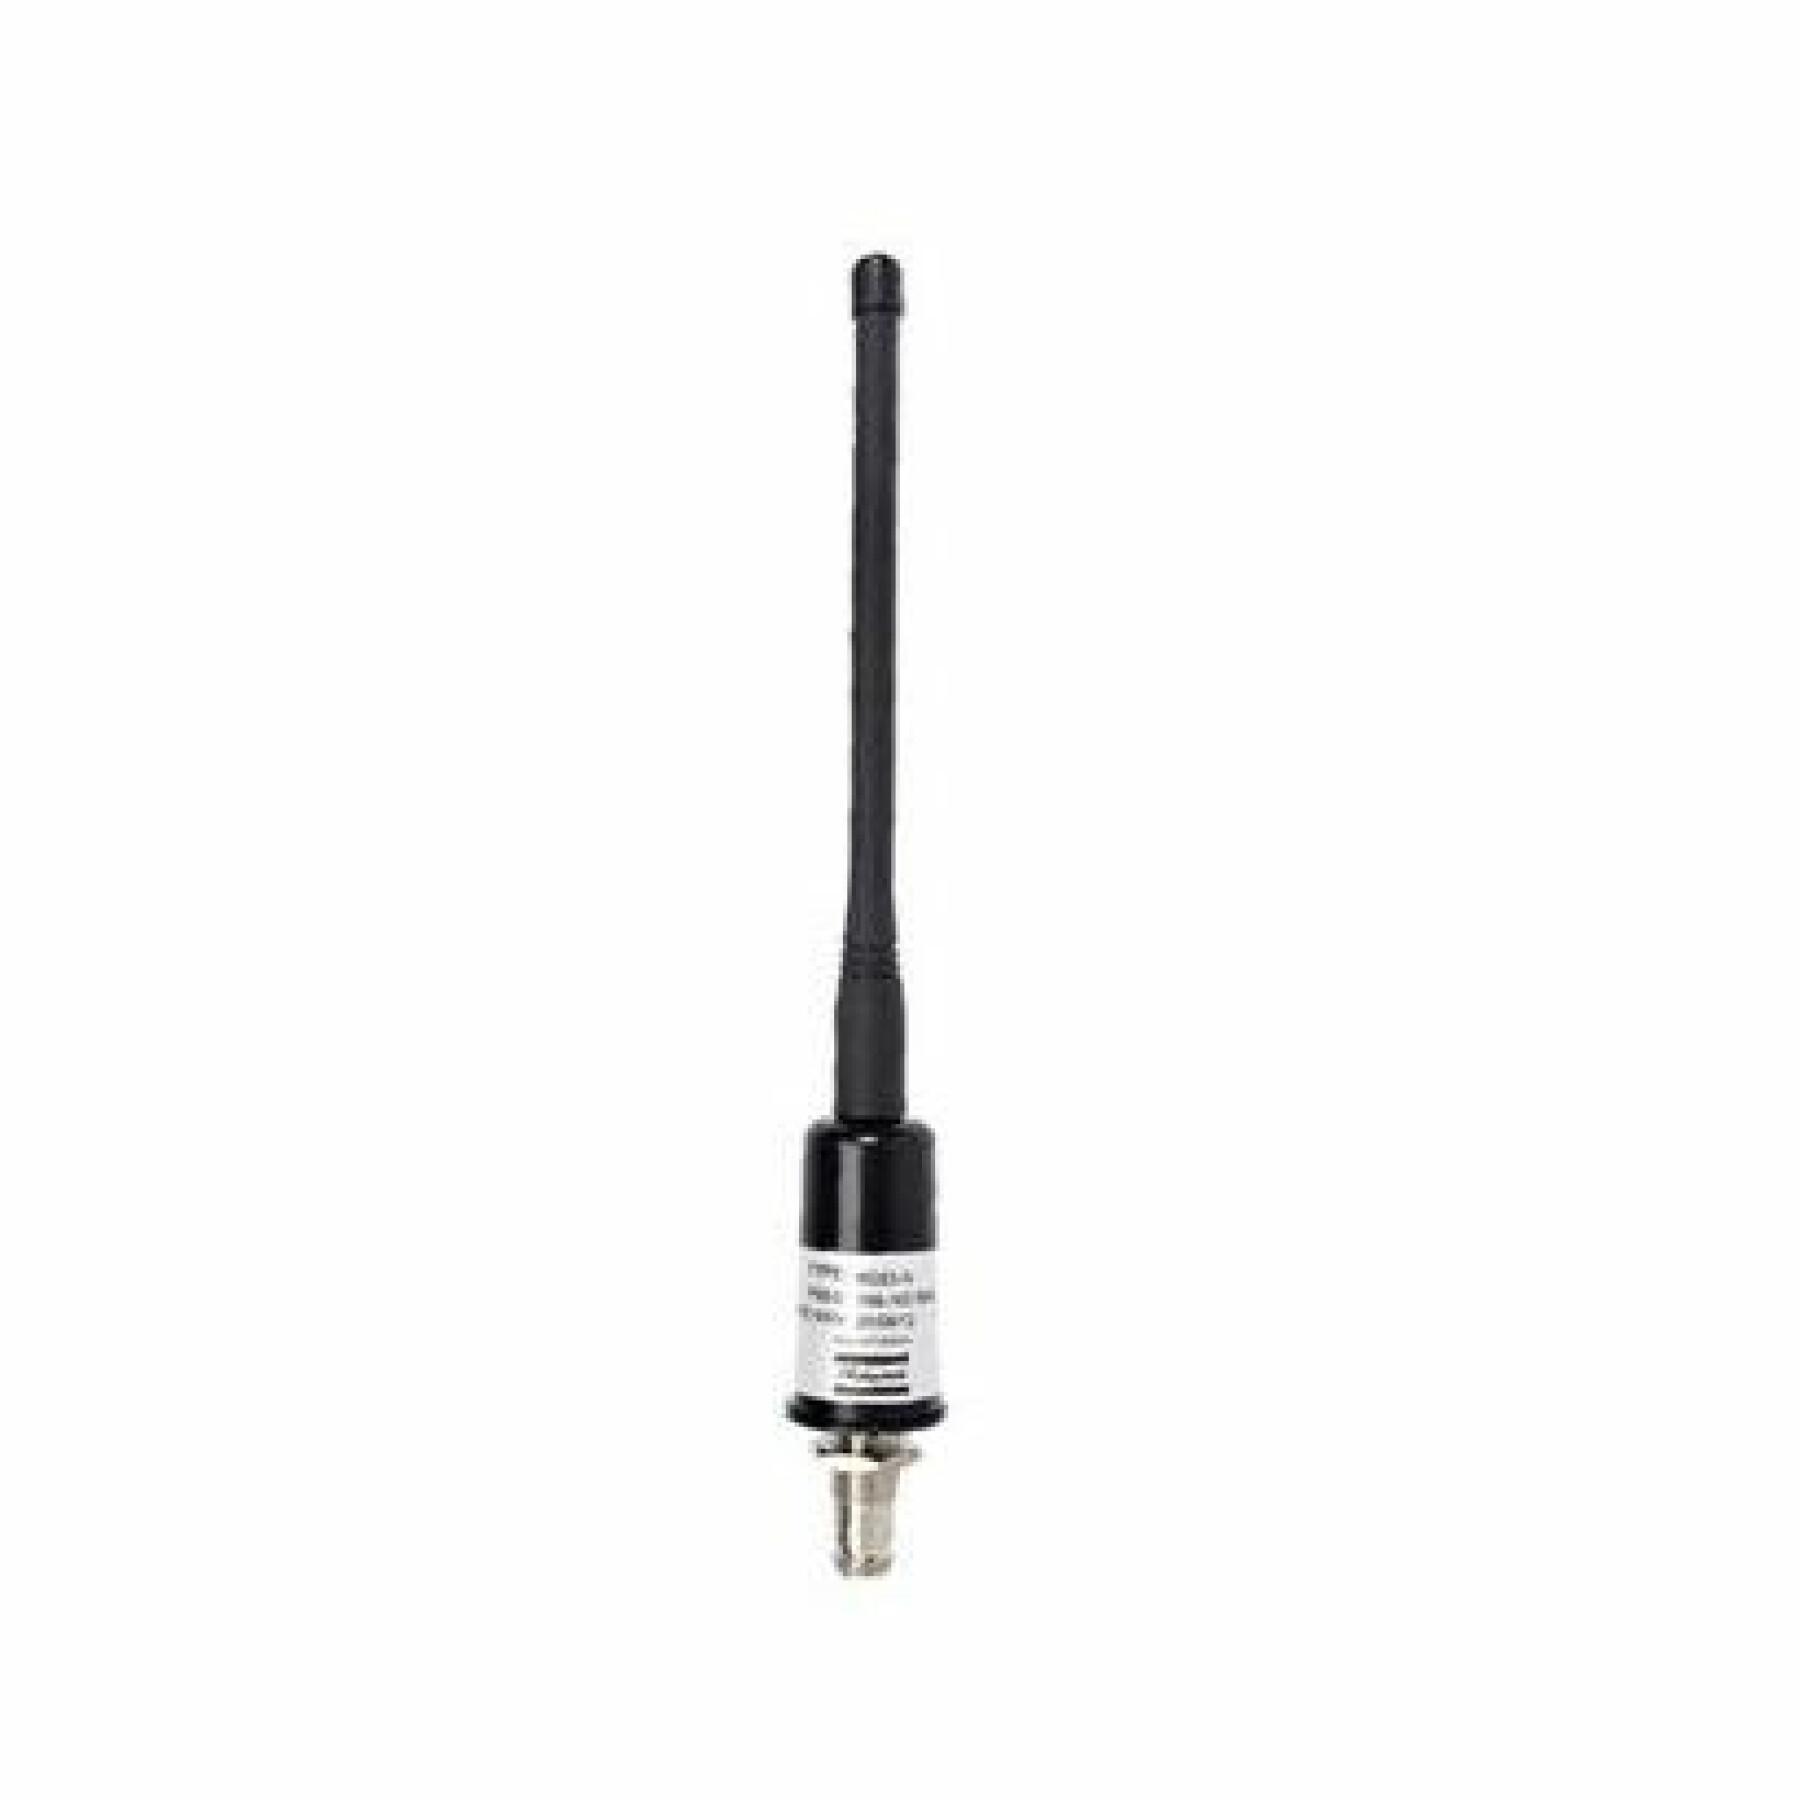 Short helical antenna without cable Shakespeare AIS 0.31m - 3dB